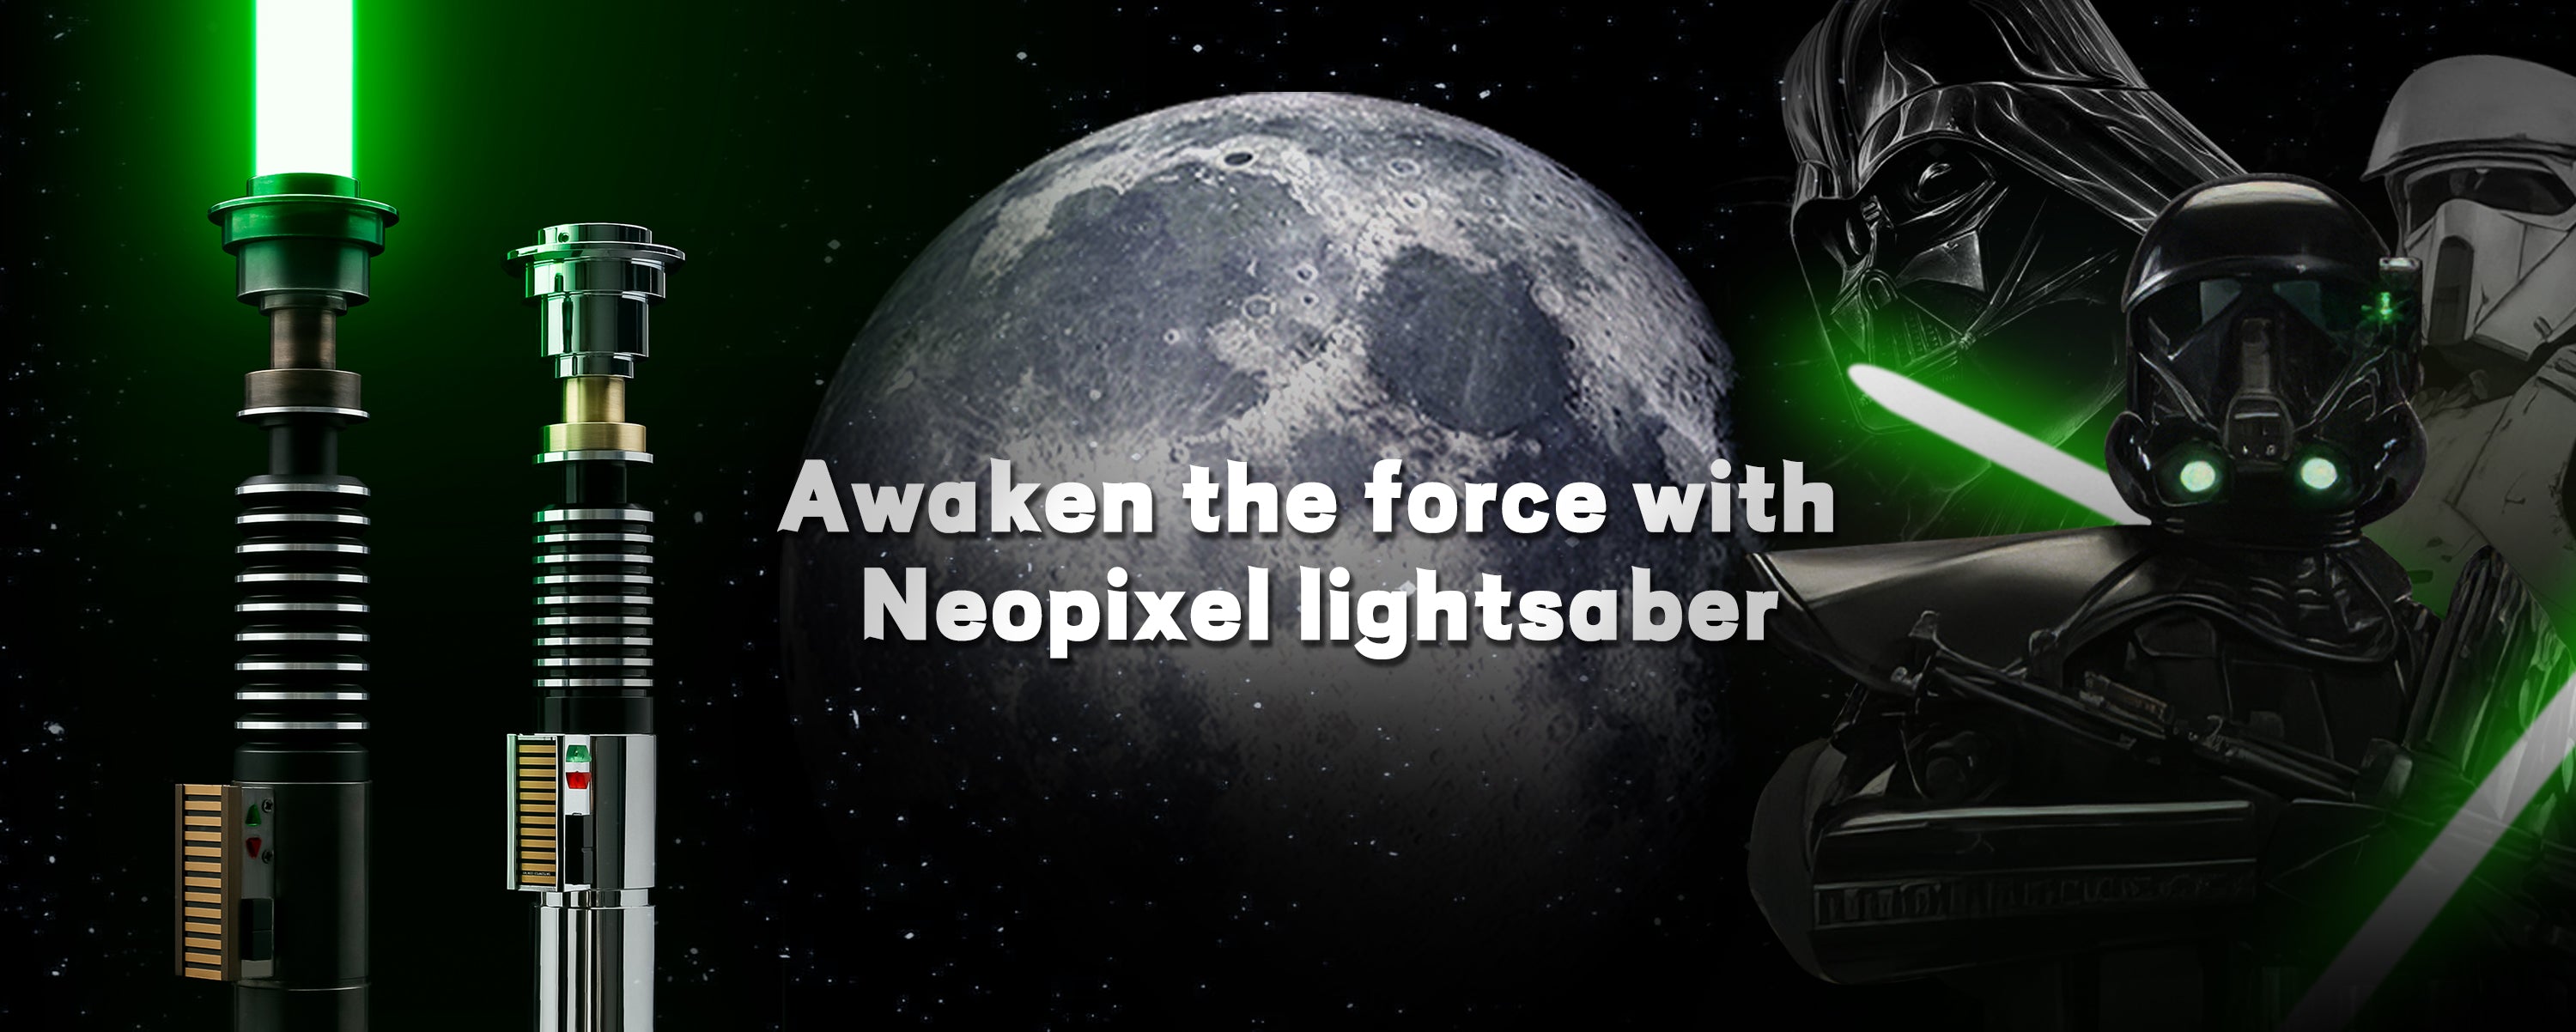 CXSABER’s latest lightsaber, latest LED light effect technology, limited-time offer, come and take a look!